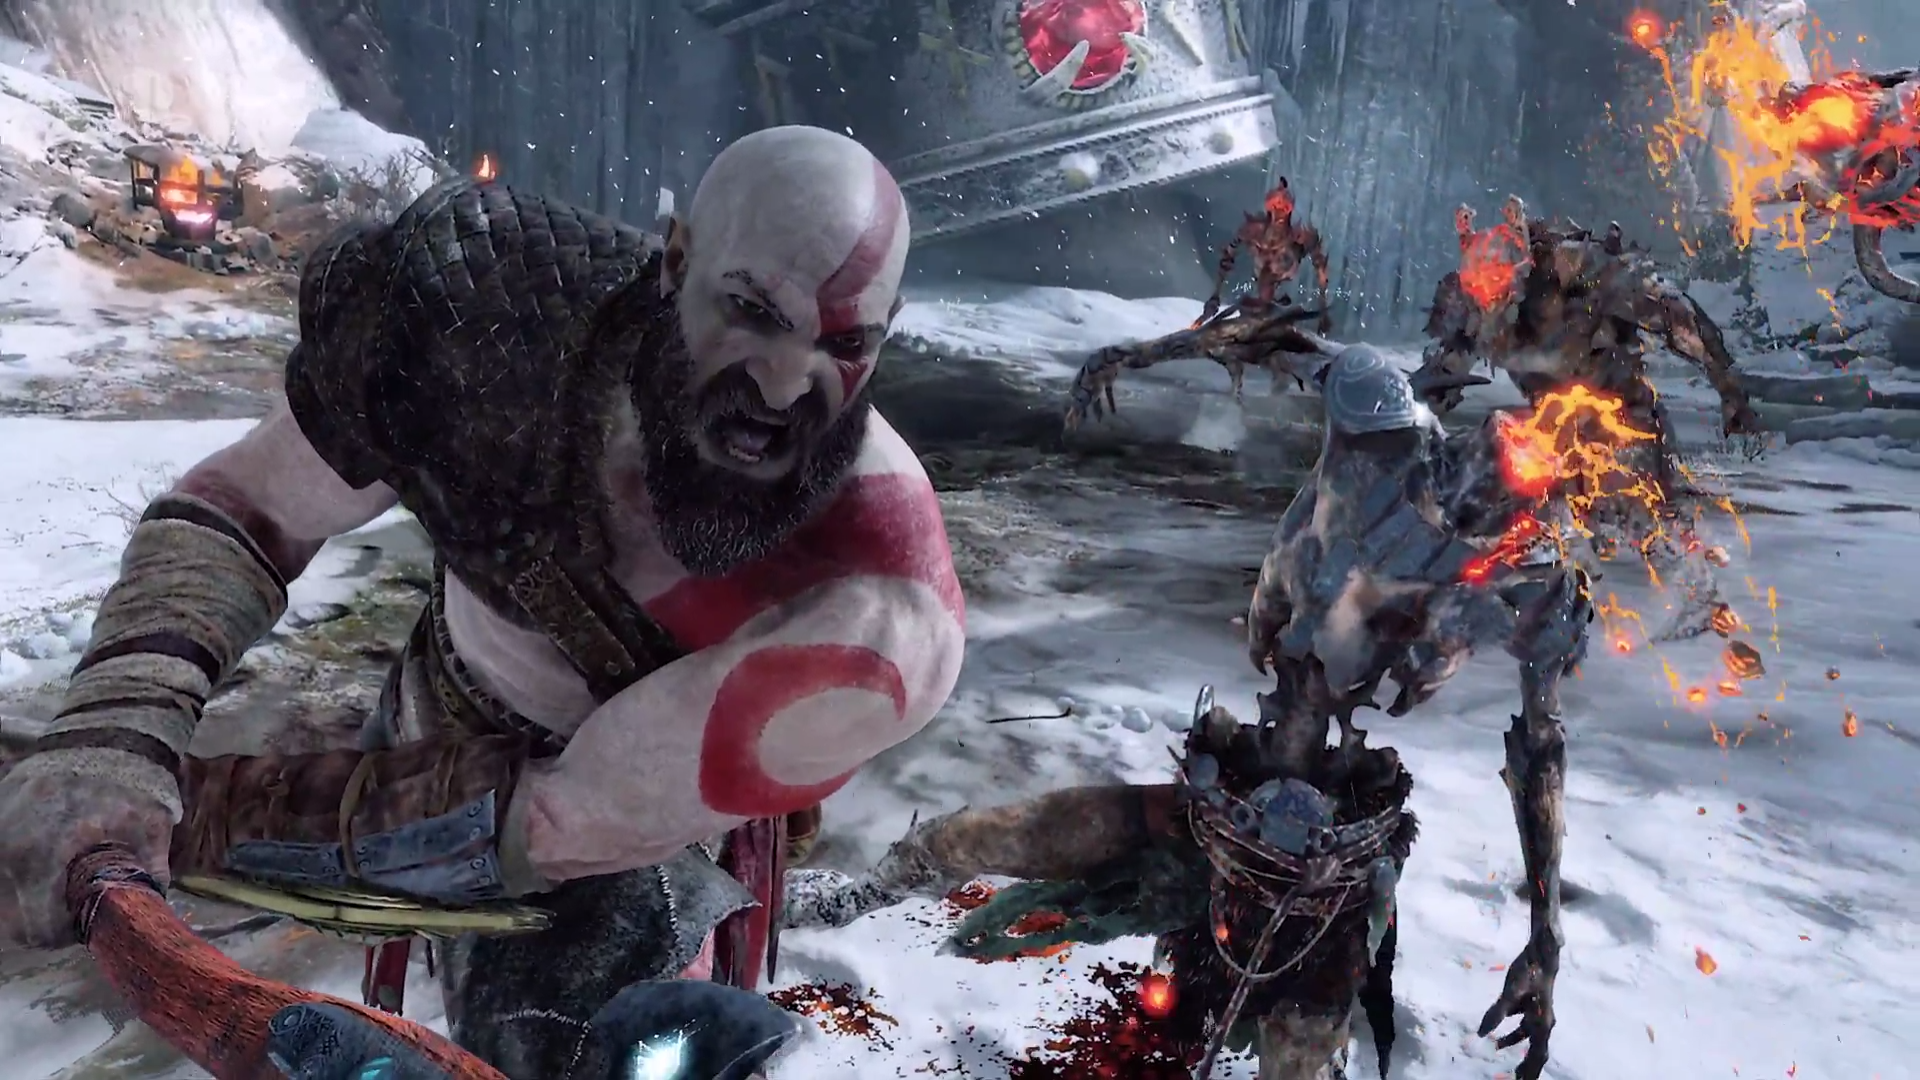 God of War Kratos slashing an enemy with his axe